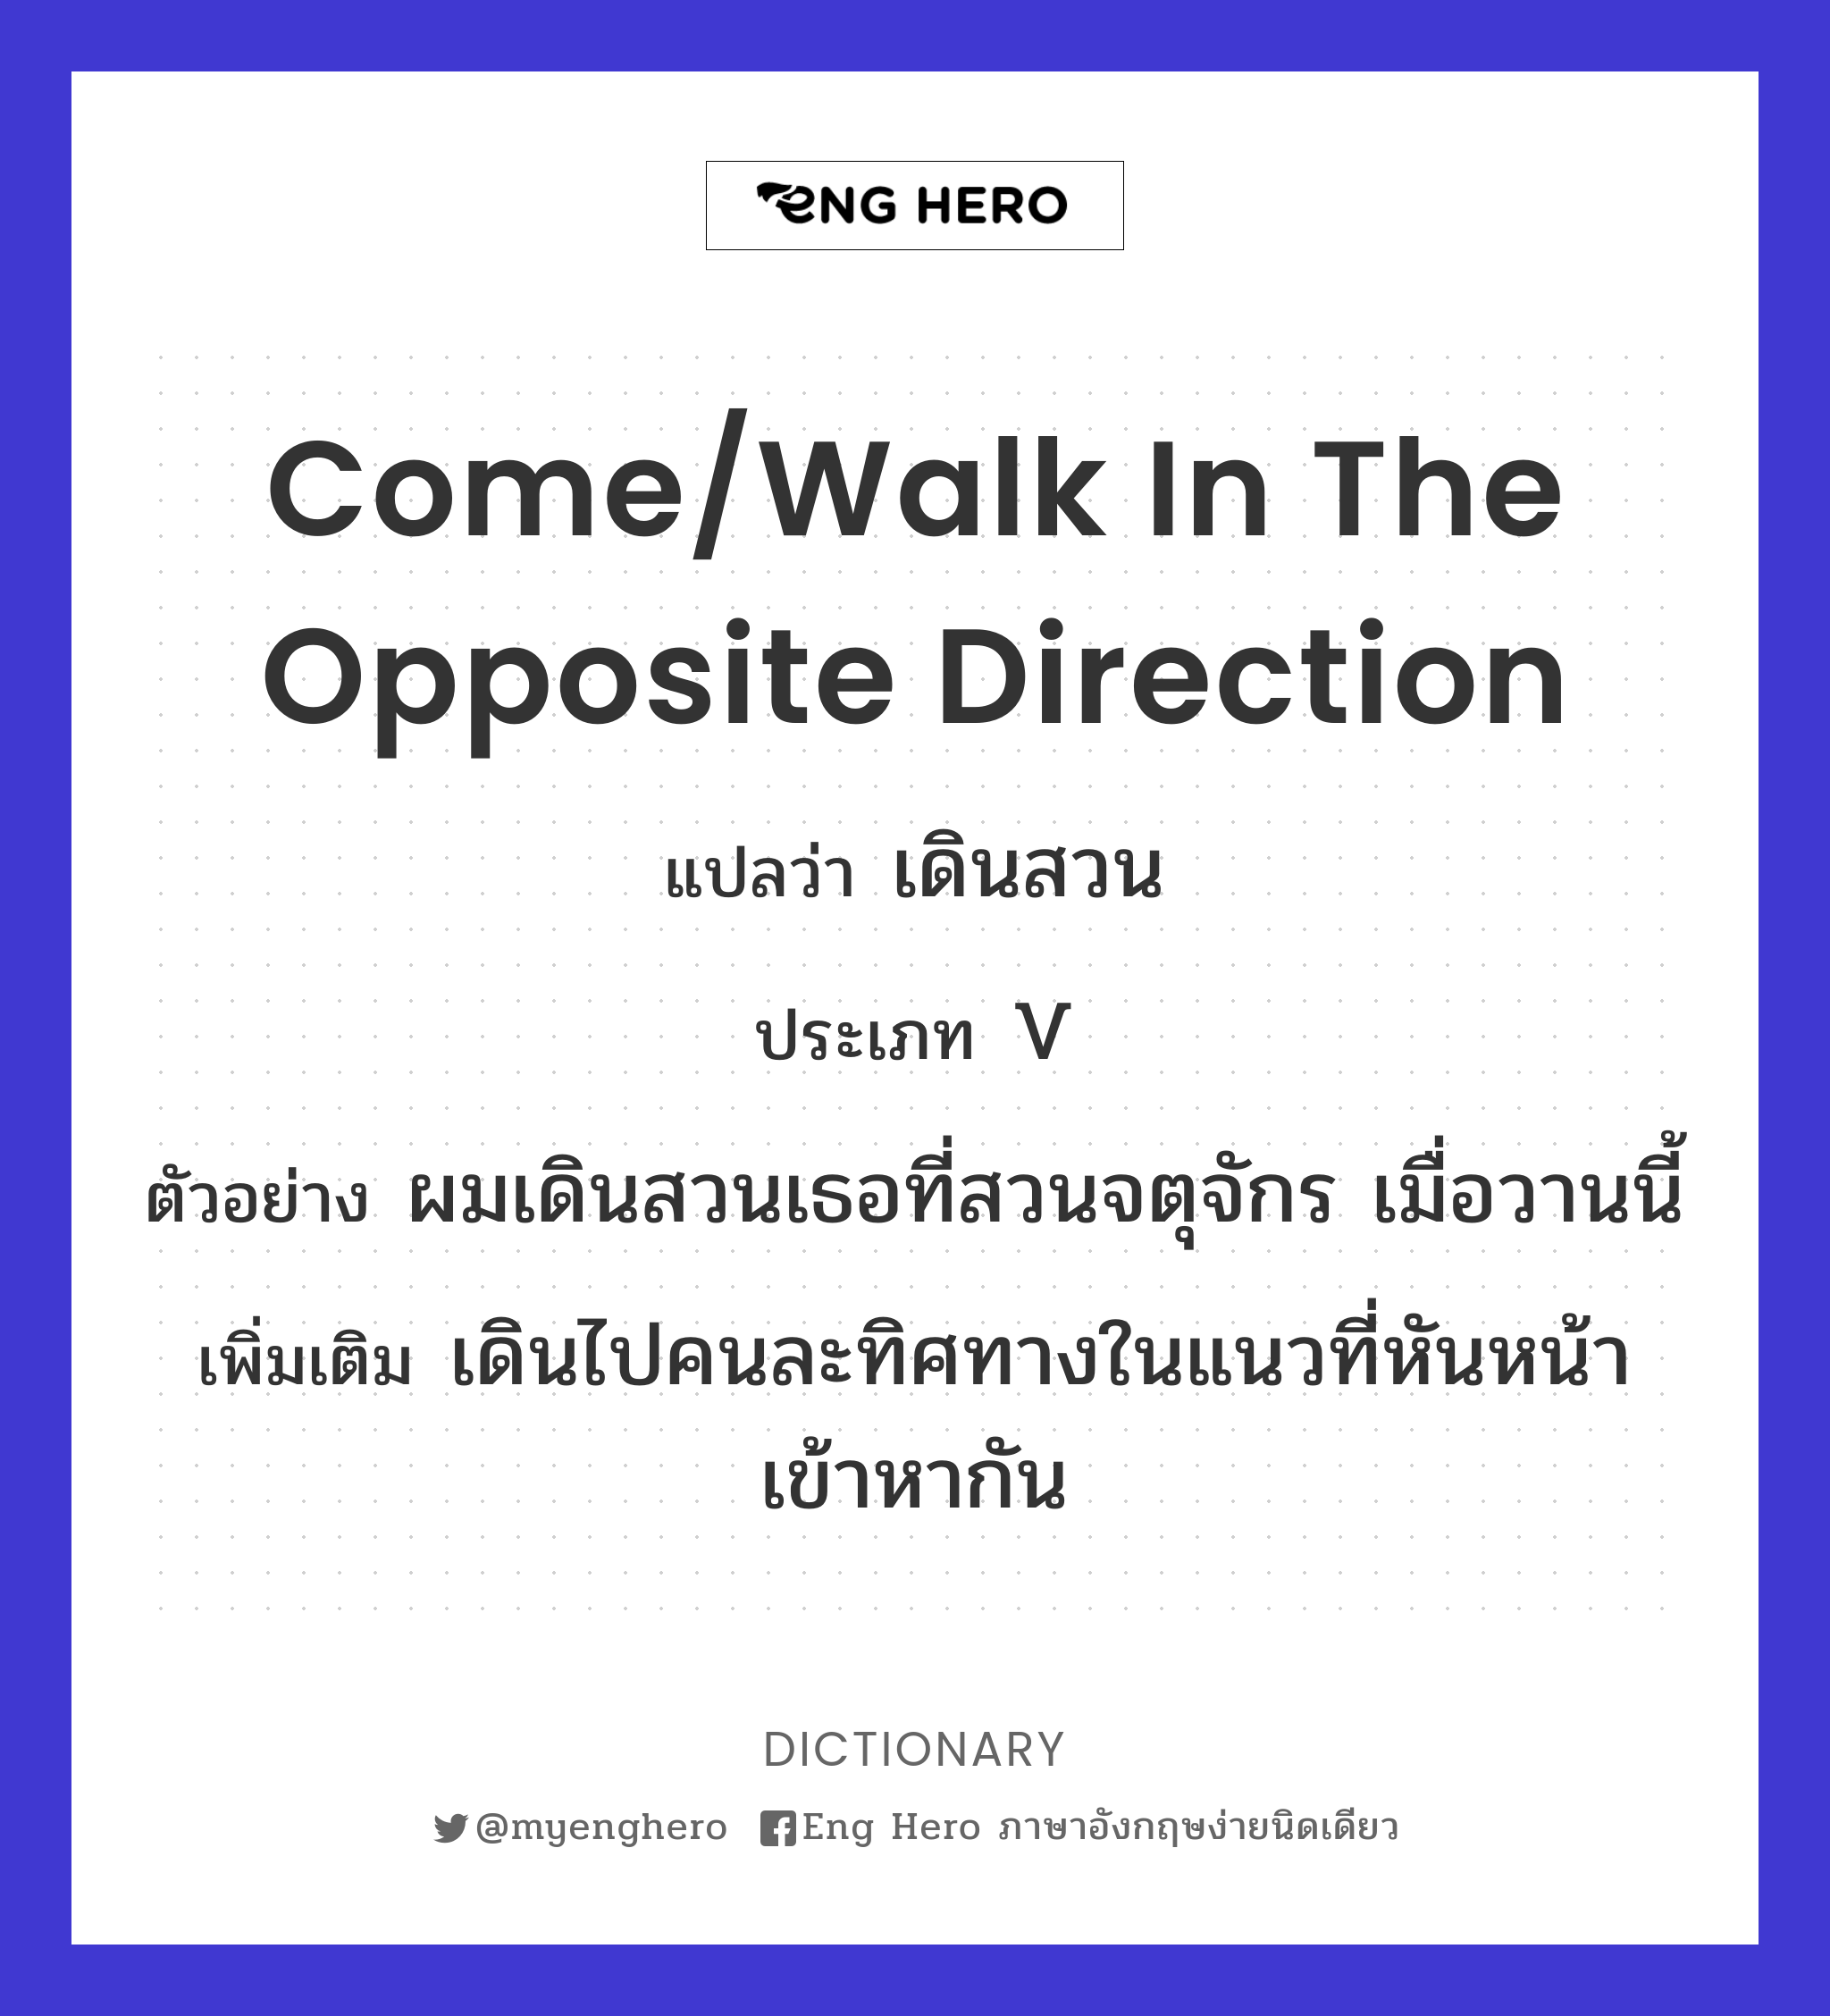 come/walk in the opposite direction